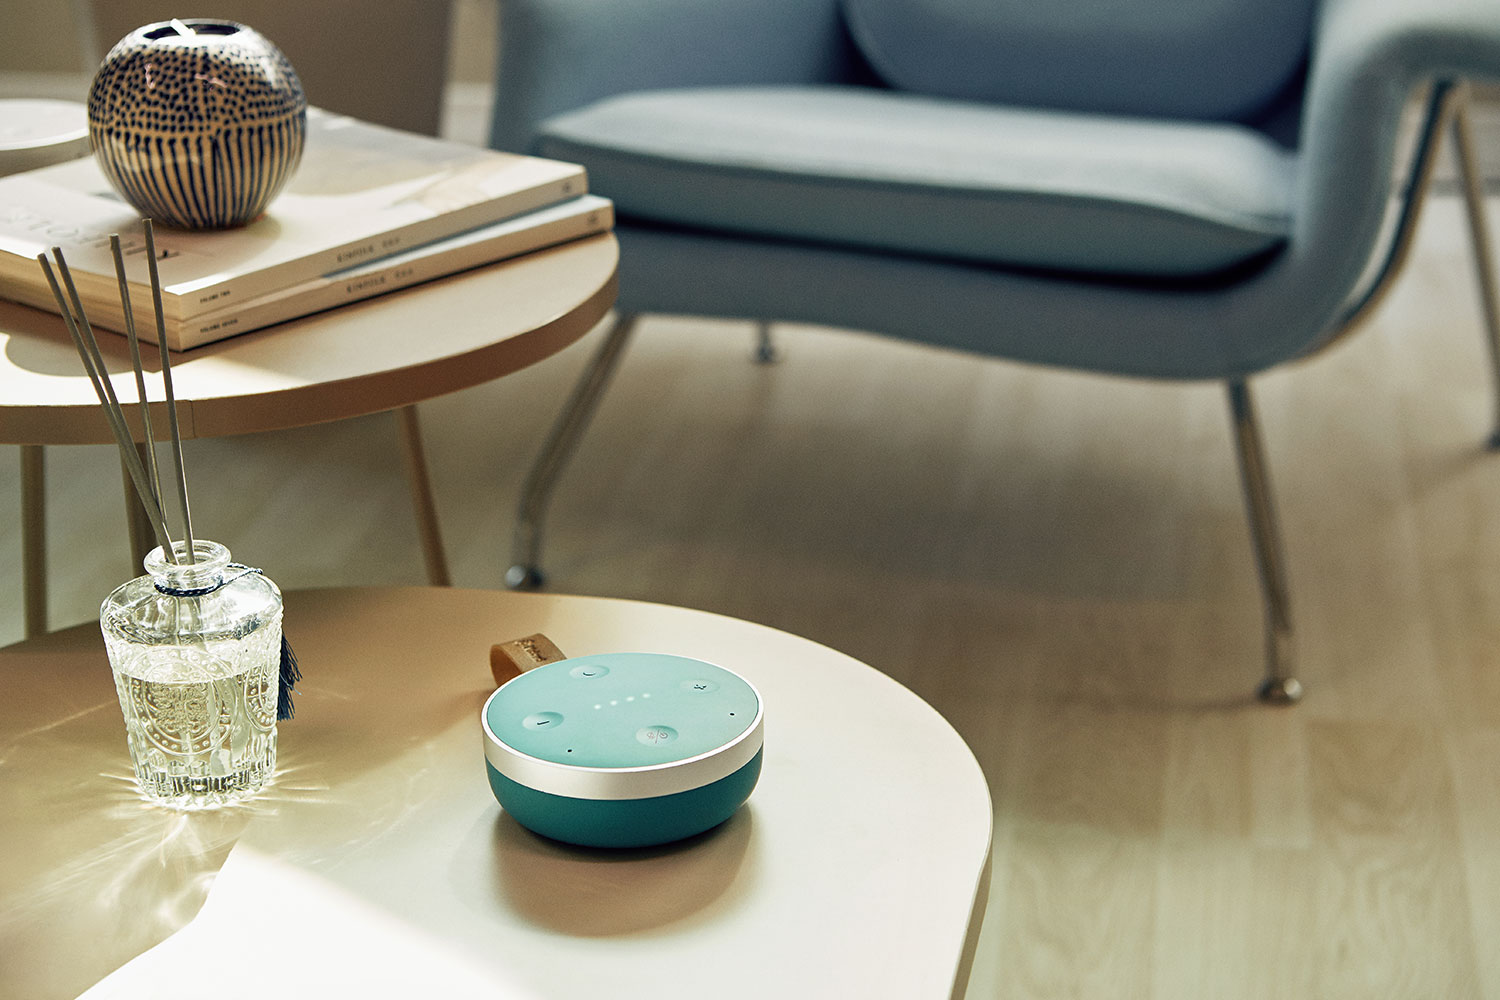 the tichome mini is a portable google assistant speaker review